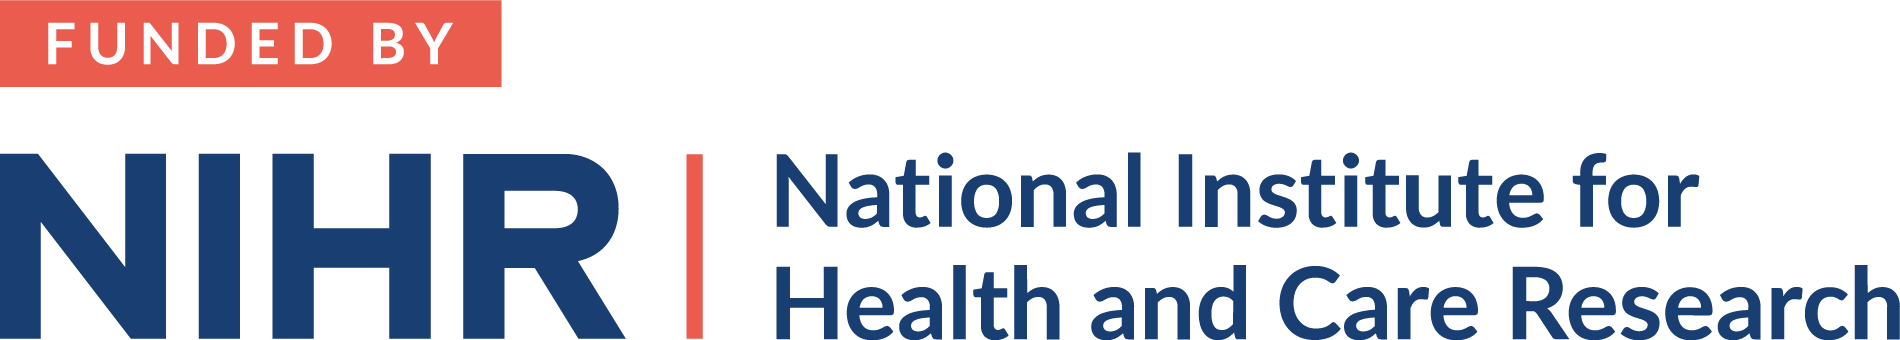 Logo says "Funded by NIHR - National Institute for Health and Care Research